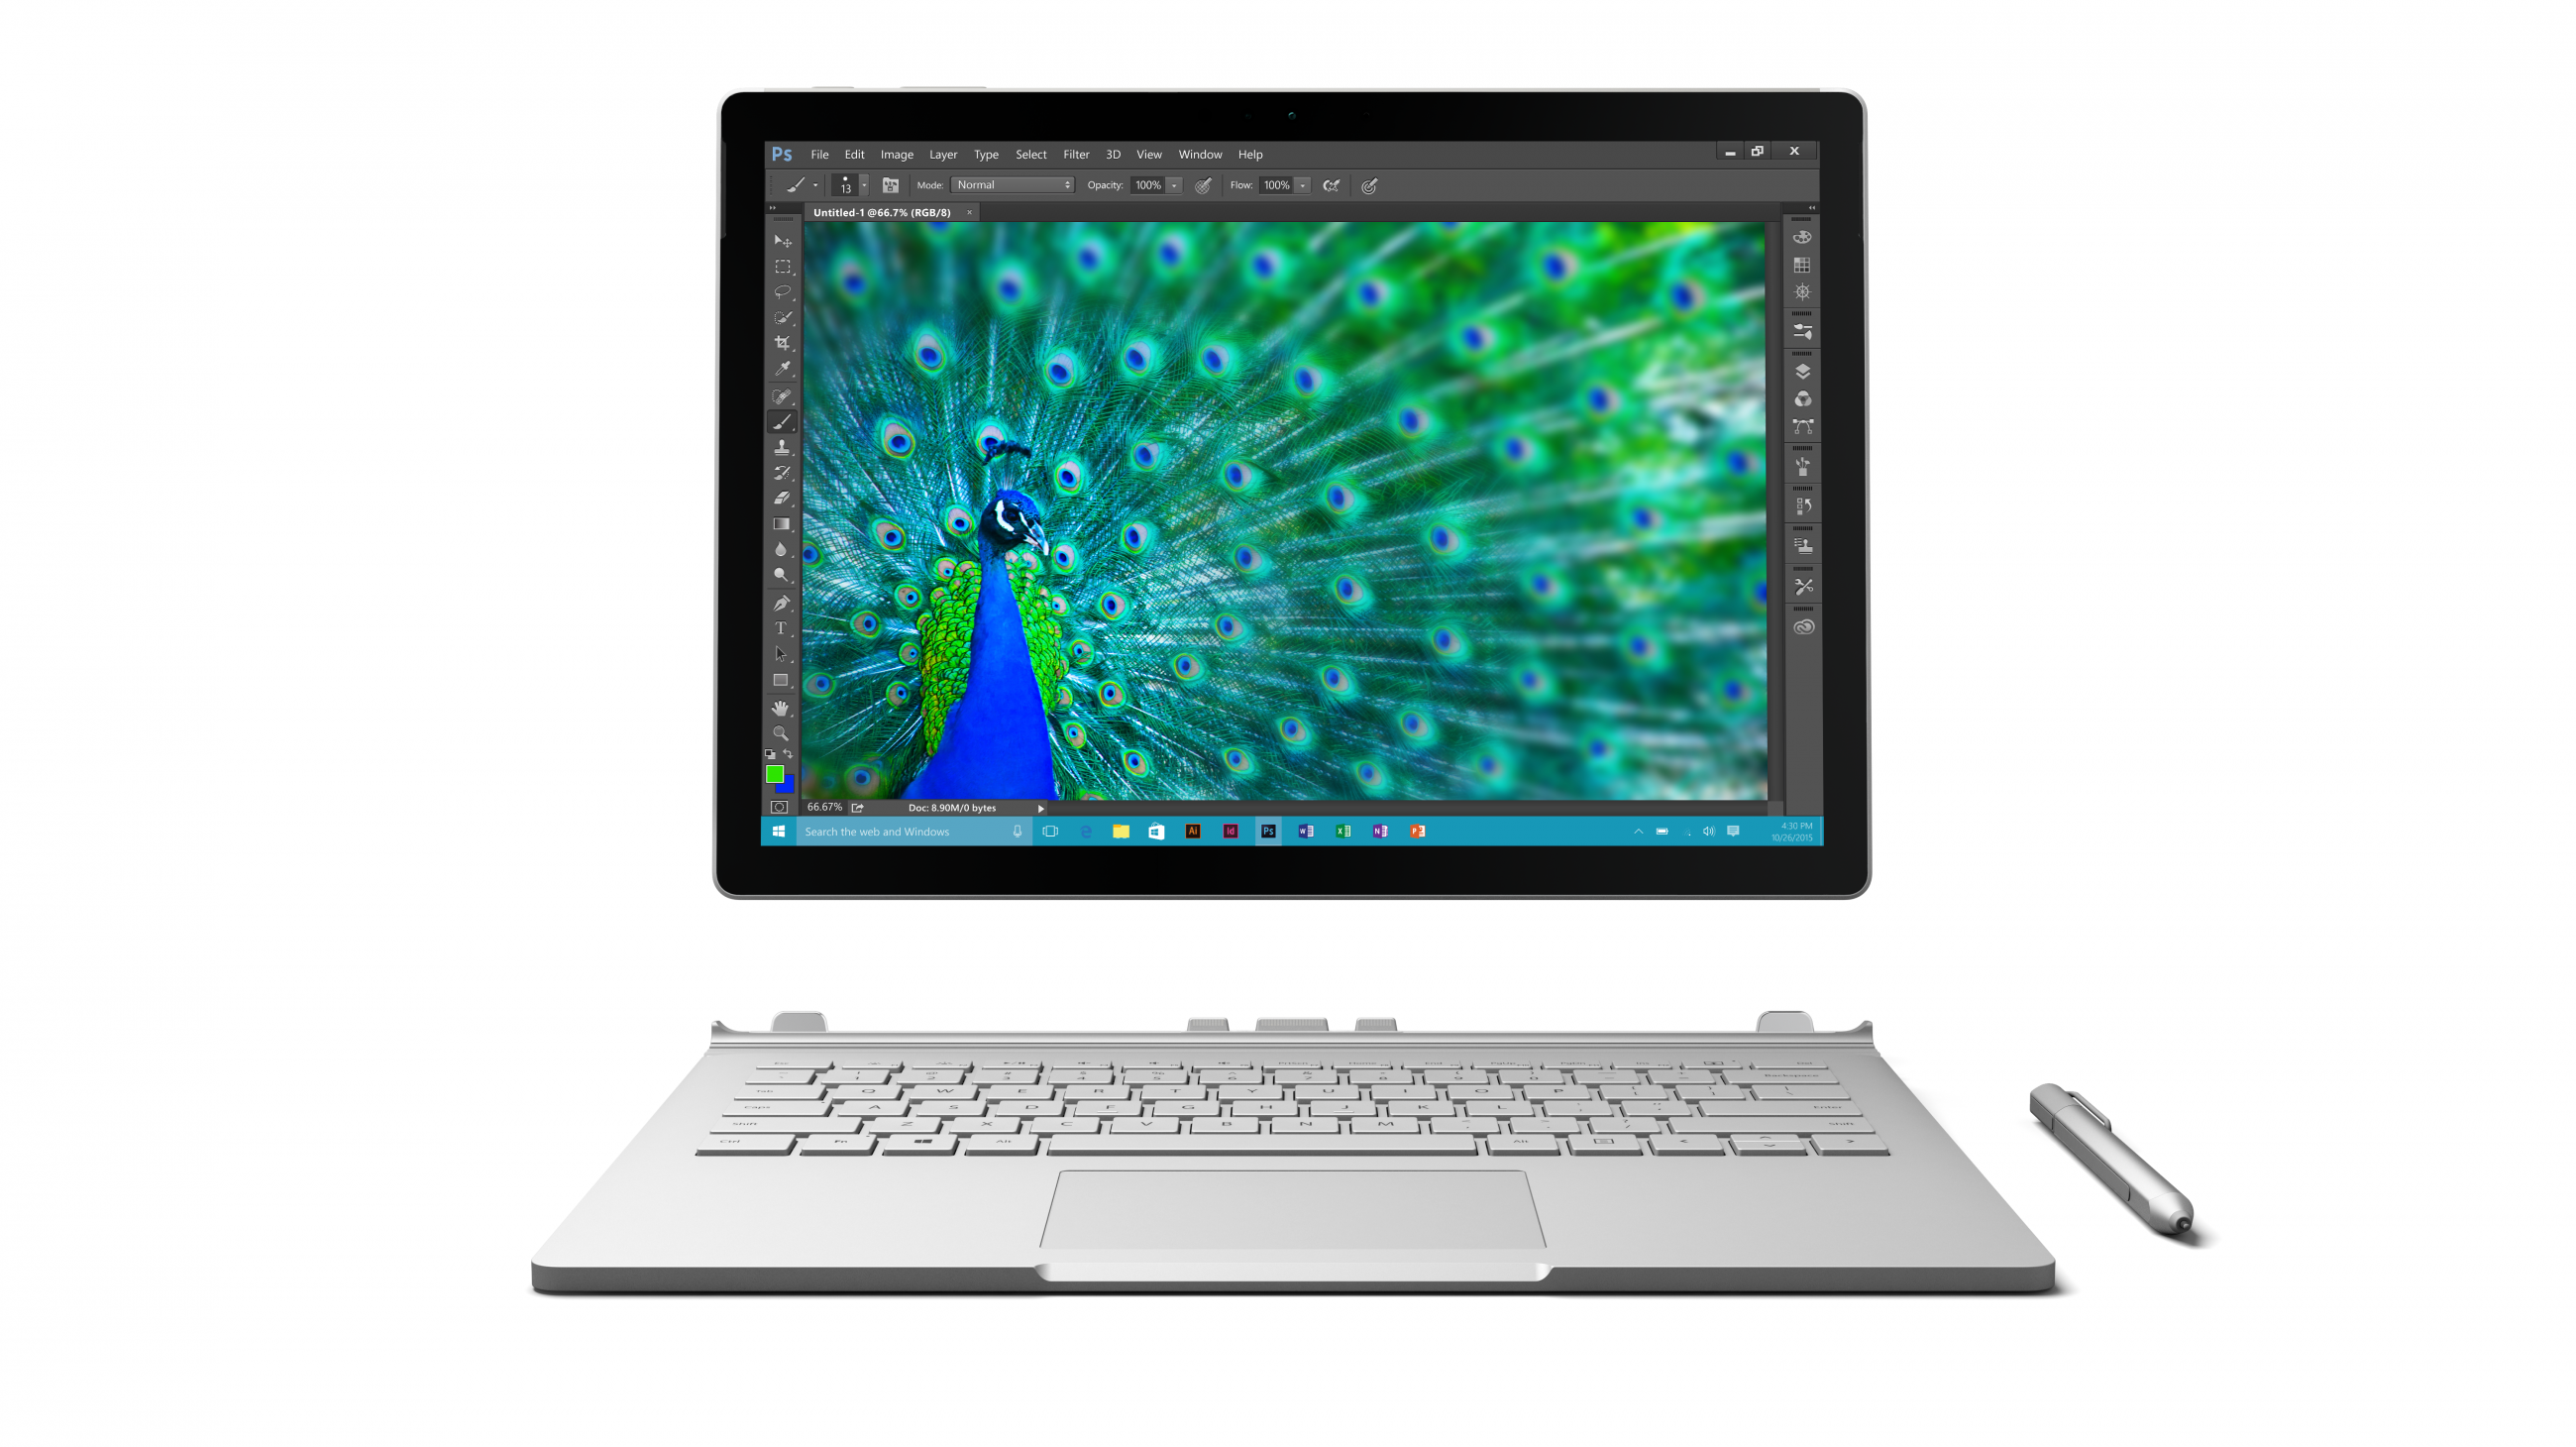 Surface Book Image E1444134958401 Check Out The Hi